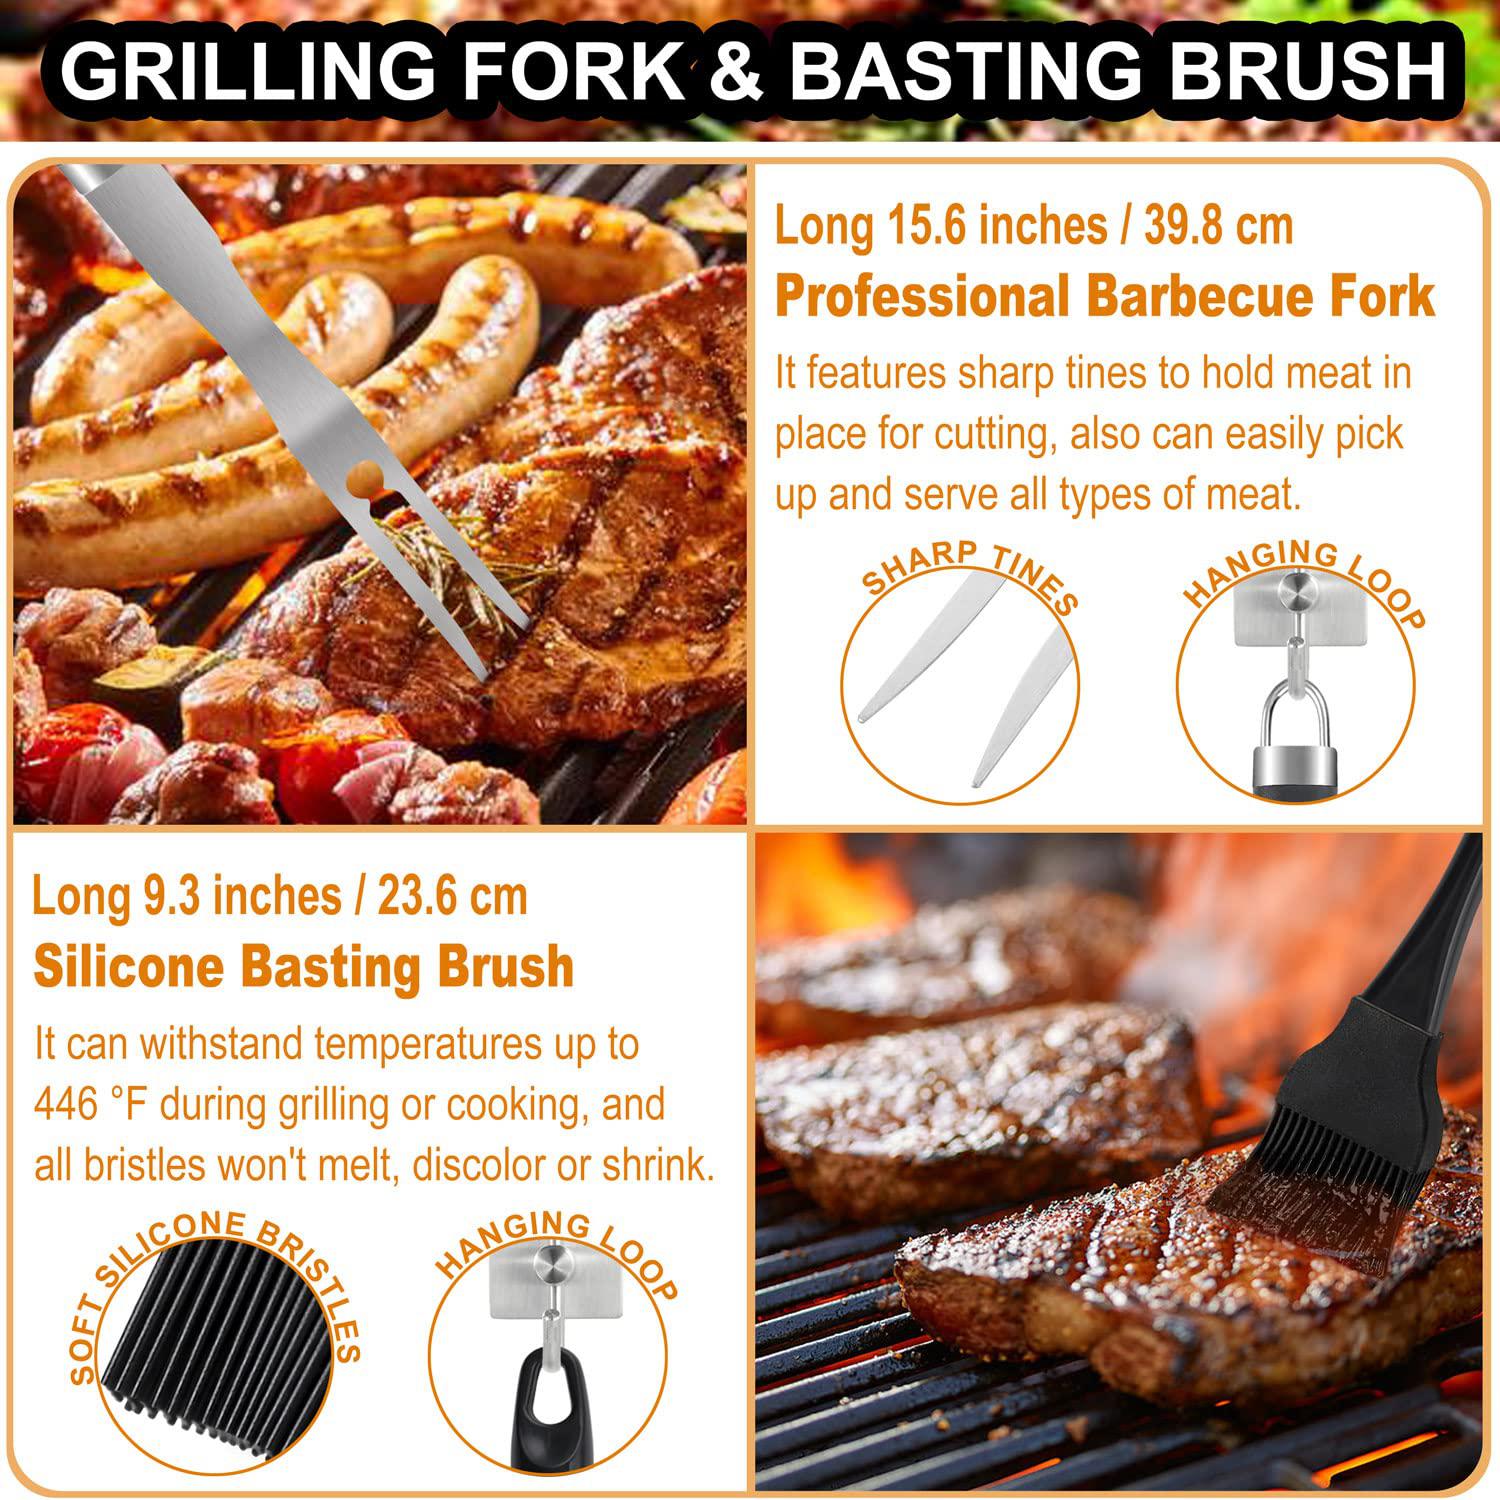 poligo 26 pcs grill set backyard bbq grill accessories stainless steel grill utensils set with bag for father's day dads birt